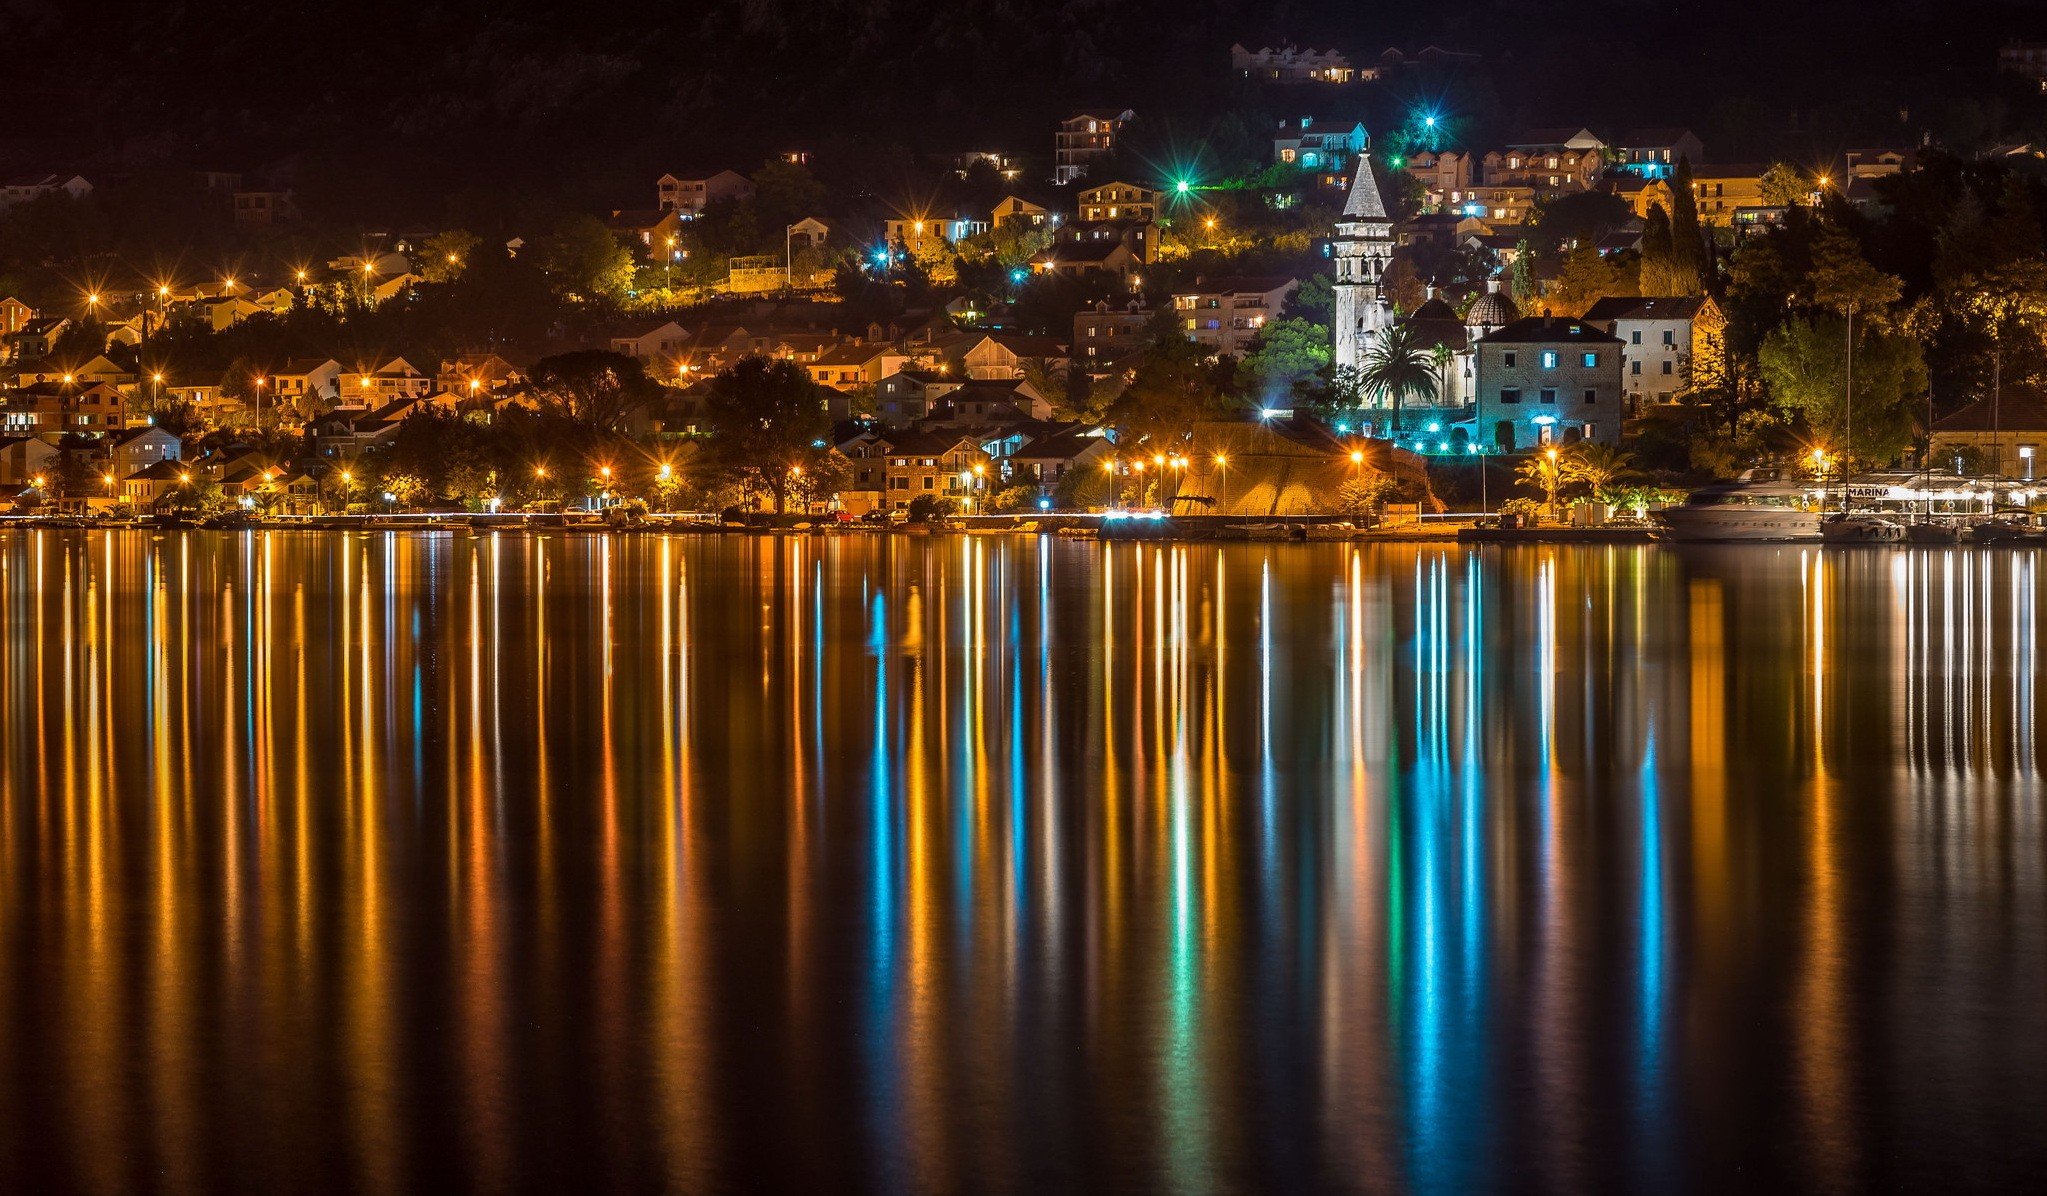 cityscape, Night, Lights, Building, Reflection, Water, Church, Trees, Montenegro, Town, Yachts Wallpaper